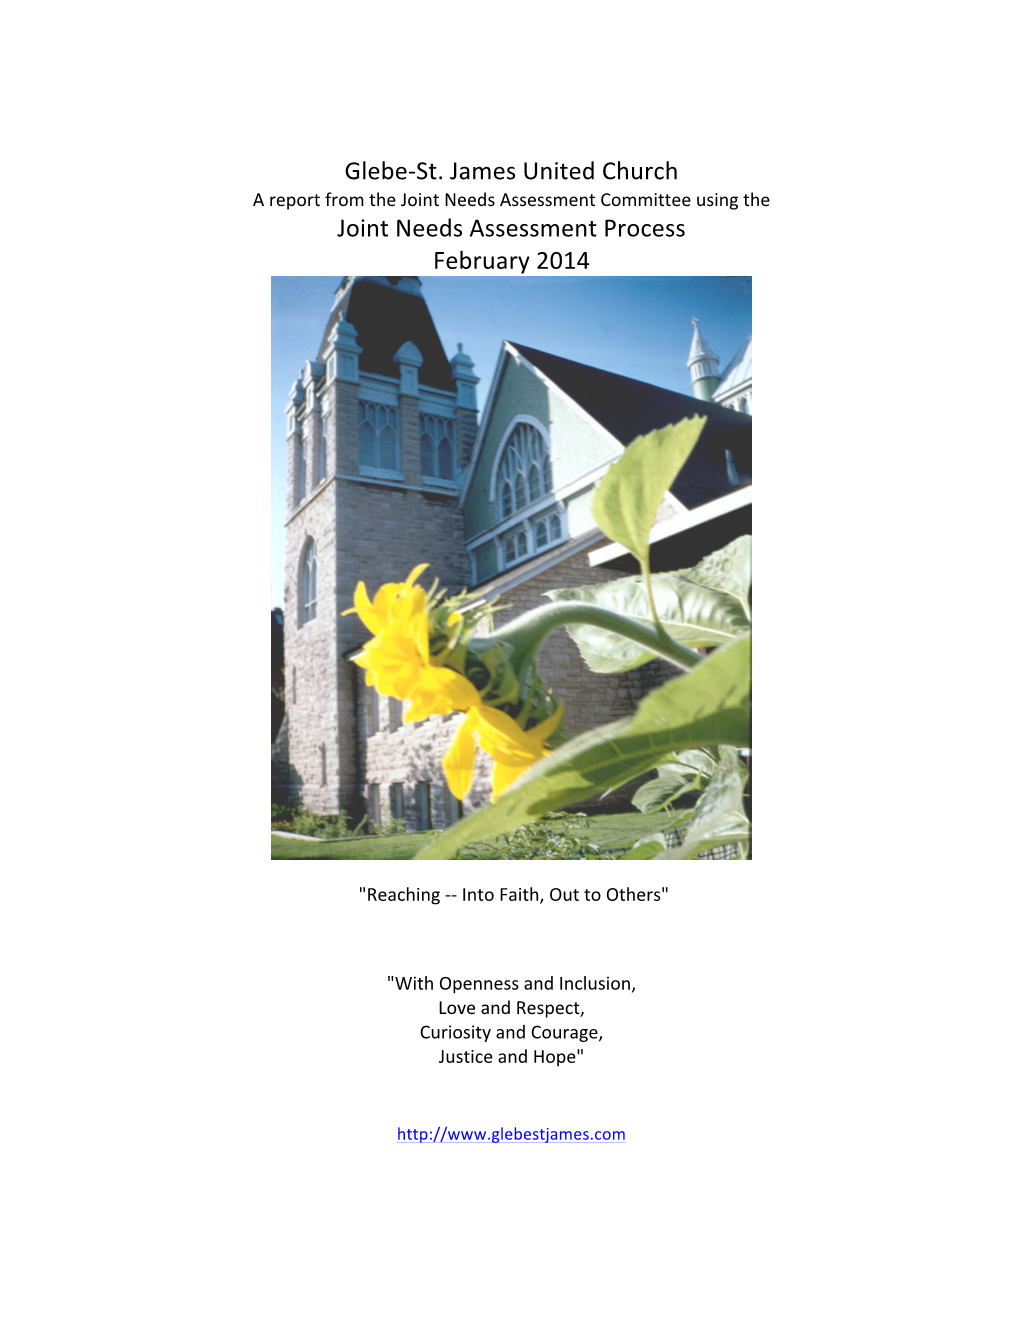 Glebe-St. James United Church Joint Needs Assessment Process 2014 TABLE of CONTENTS